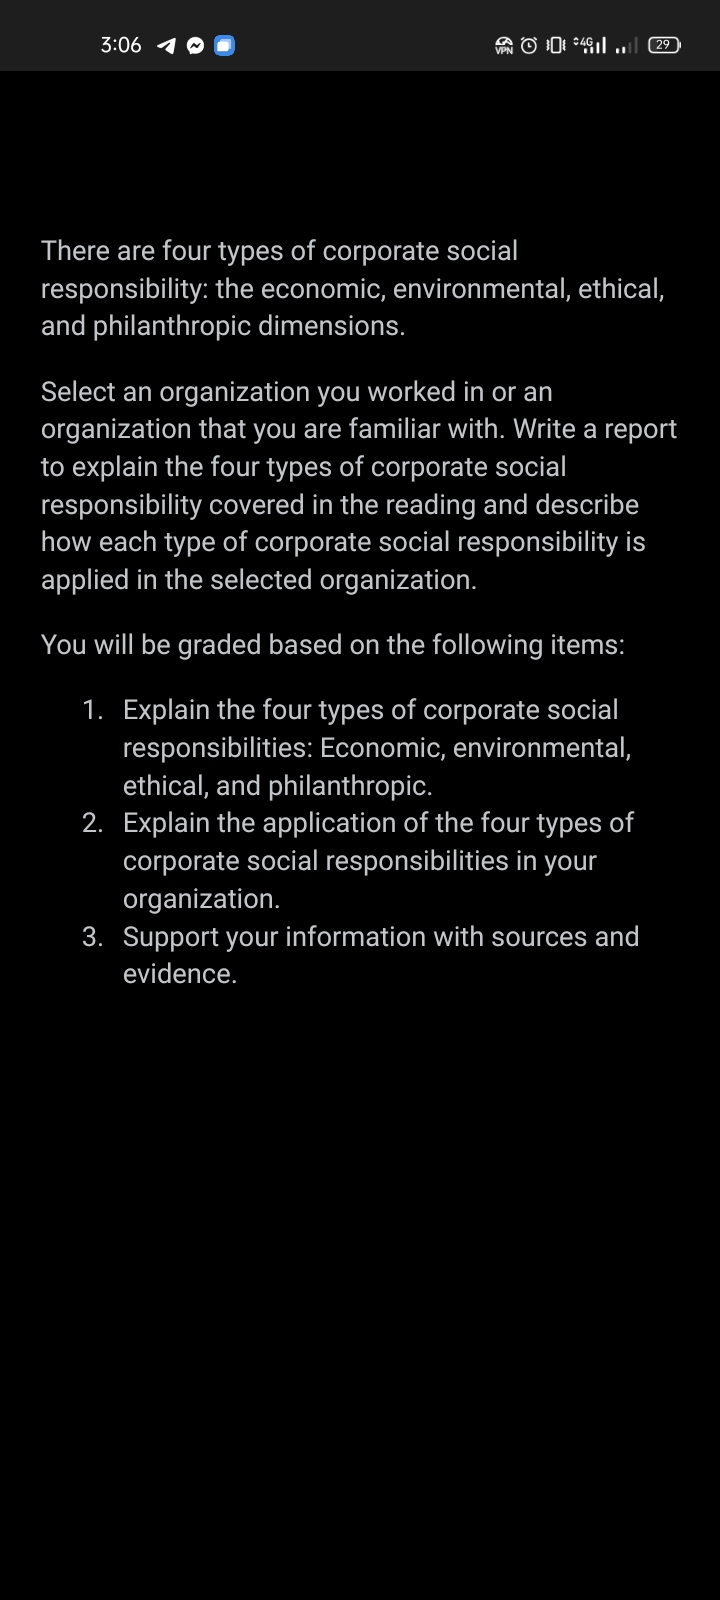 3:06
Ol
29
There are four types of corporate social
responsibility: the economic, environmental, ethical,
and philanthropic dimensions.
Select an organization you worked in or an
organization that you are familiar with. Write a report
to explain the four types of corporate social
responsibility covered in the reading and describe
how each type of corporate social responsibility is
applied in the selected organization.
You will be graded based on the following items:
1. Explain the four types of corporate social
responsibilities: Economic, environmental,
ethical, and philanthropic.
2. Explain the application of the four types of
corporate social responsibilities in your
organization.
3. Support your information with sources and
evidence.